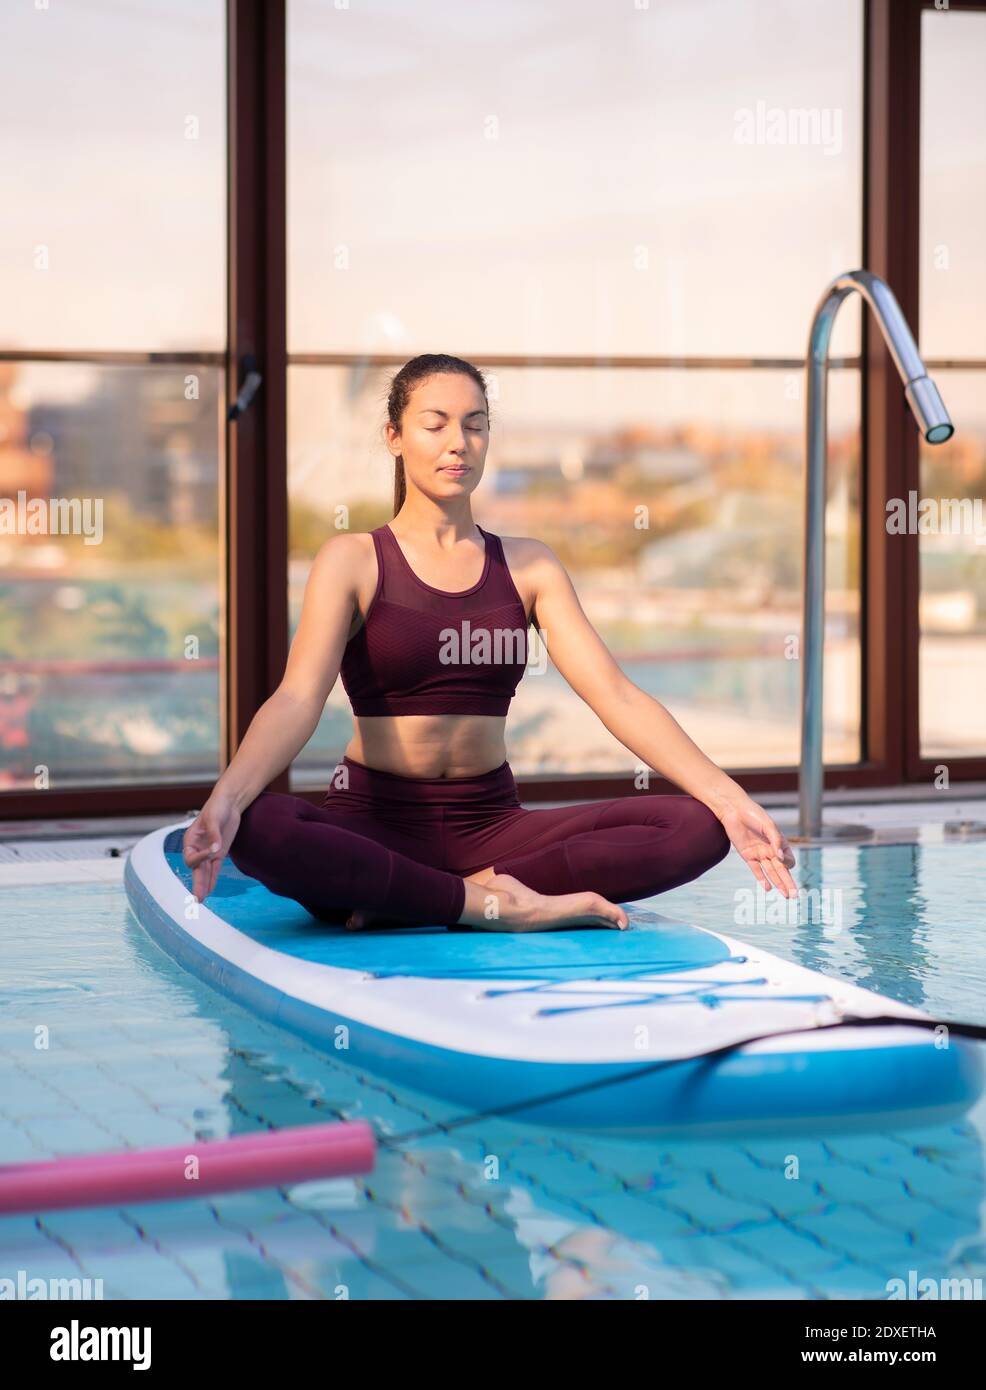 Mid adult female instructor meditating on paddleboard over swimming pool Stock Photo